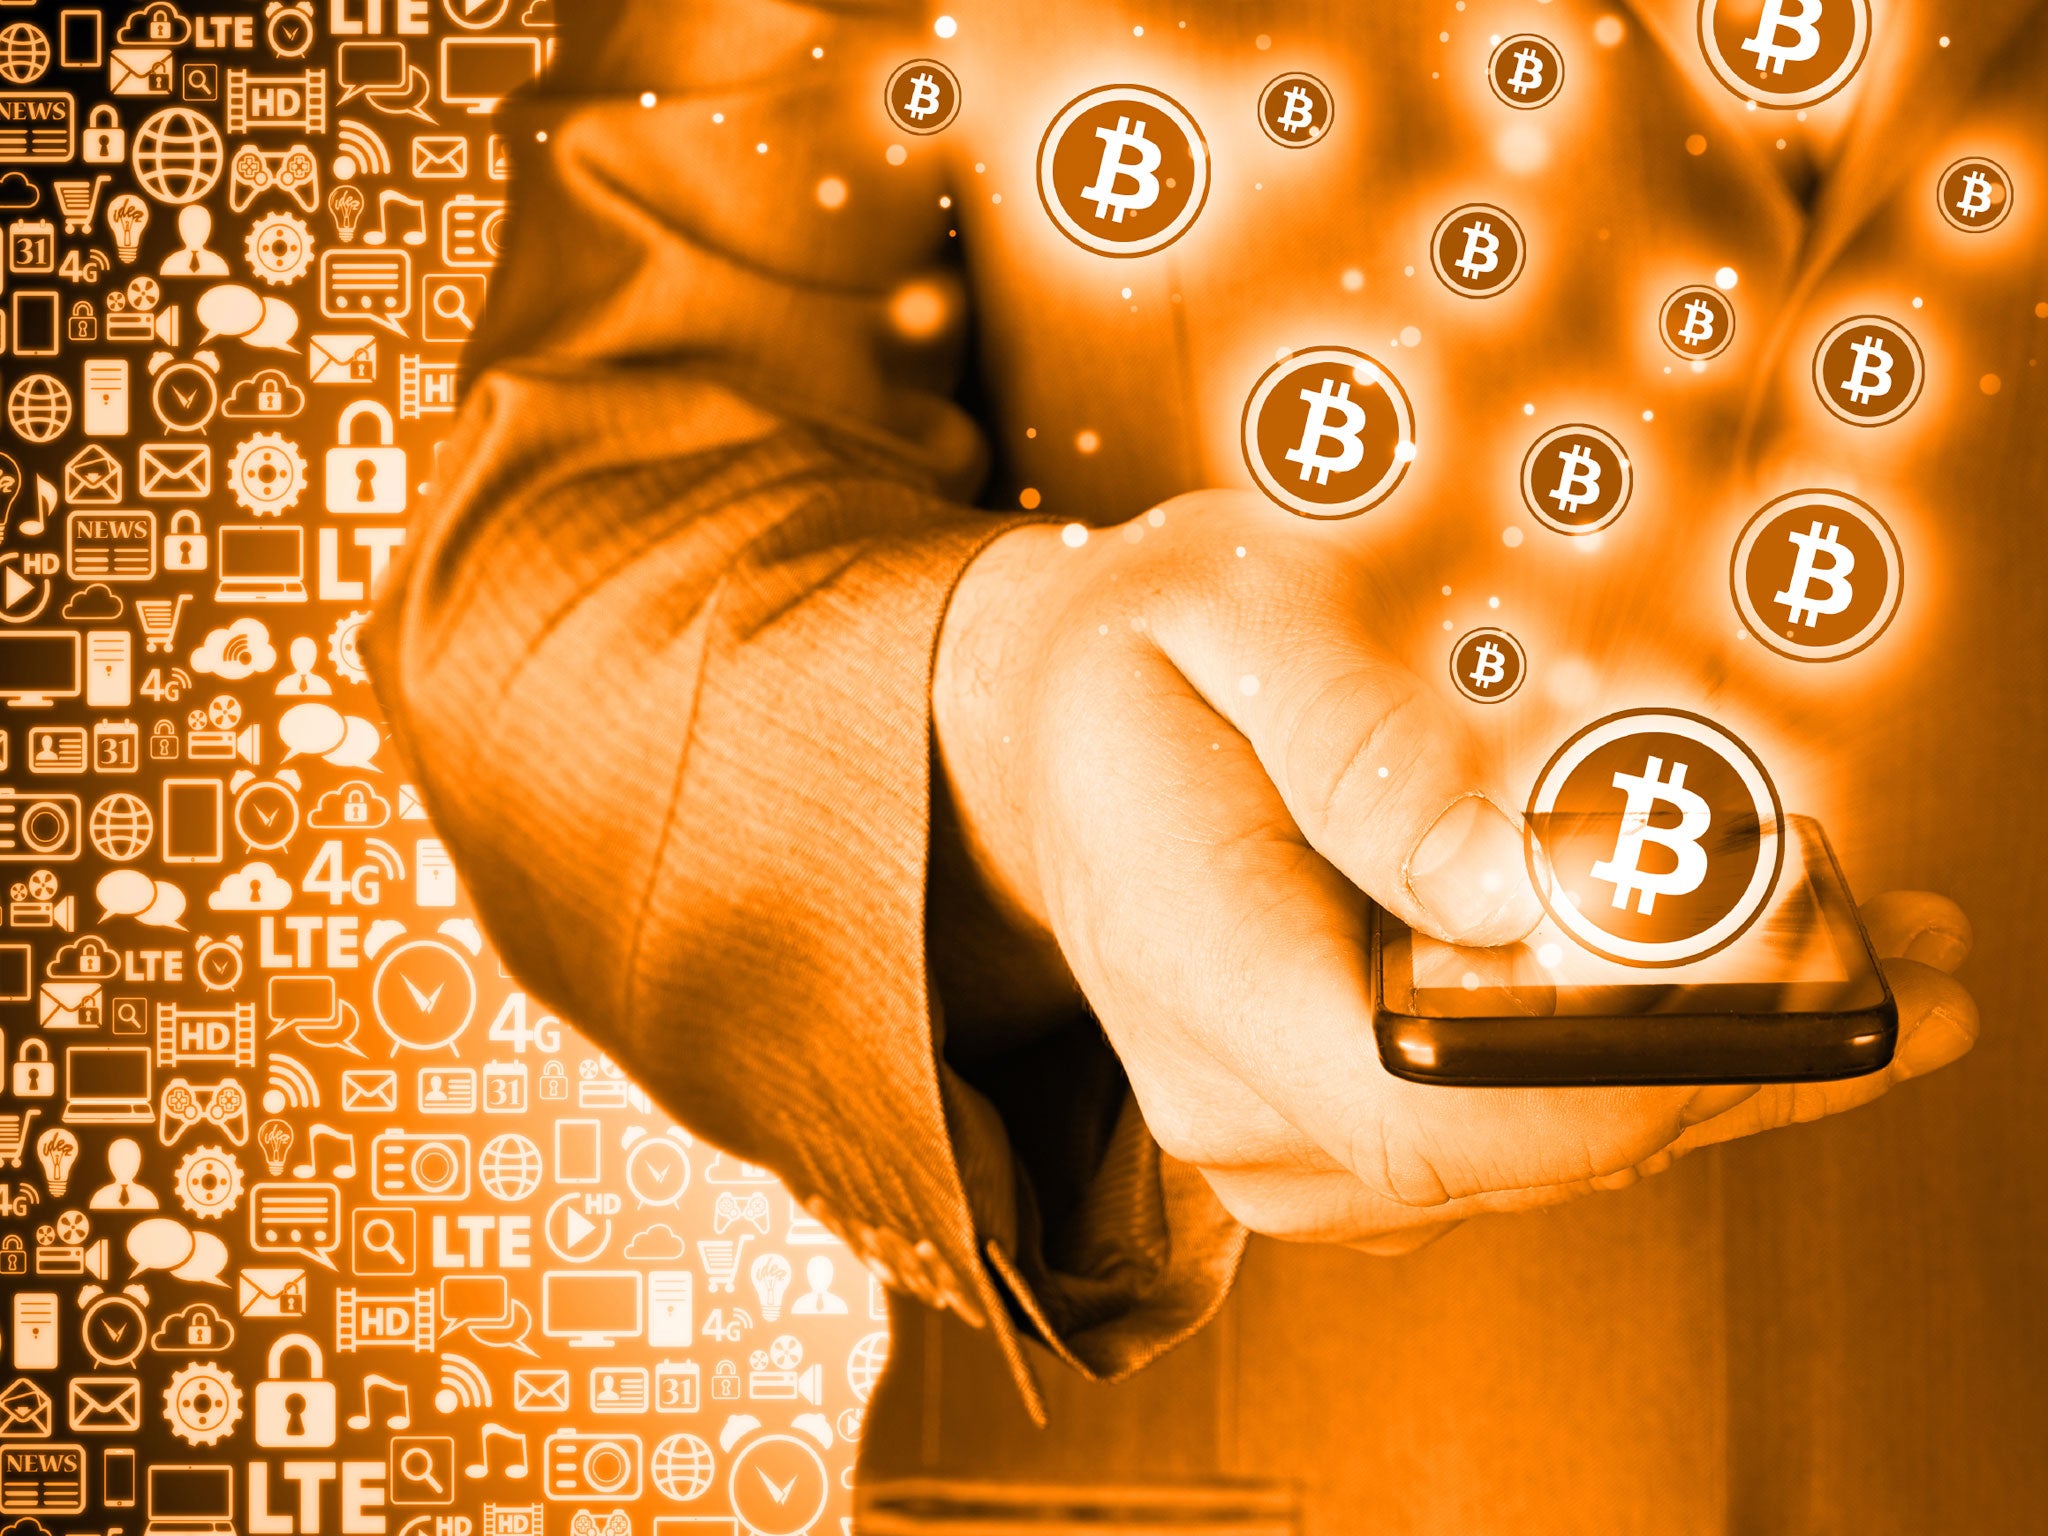 Bitcoin is a digital currency that is created and held electronically